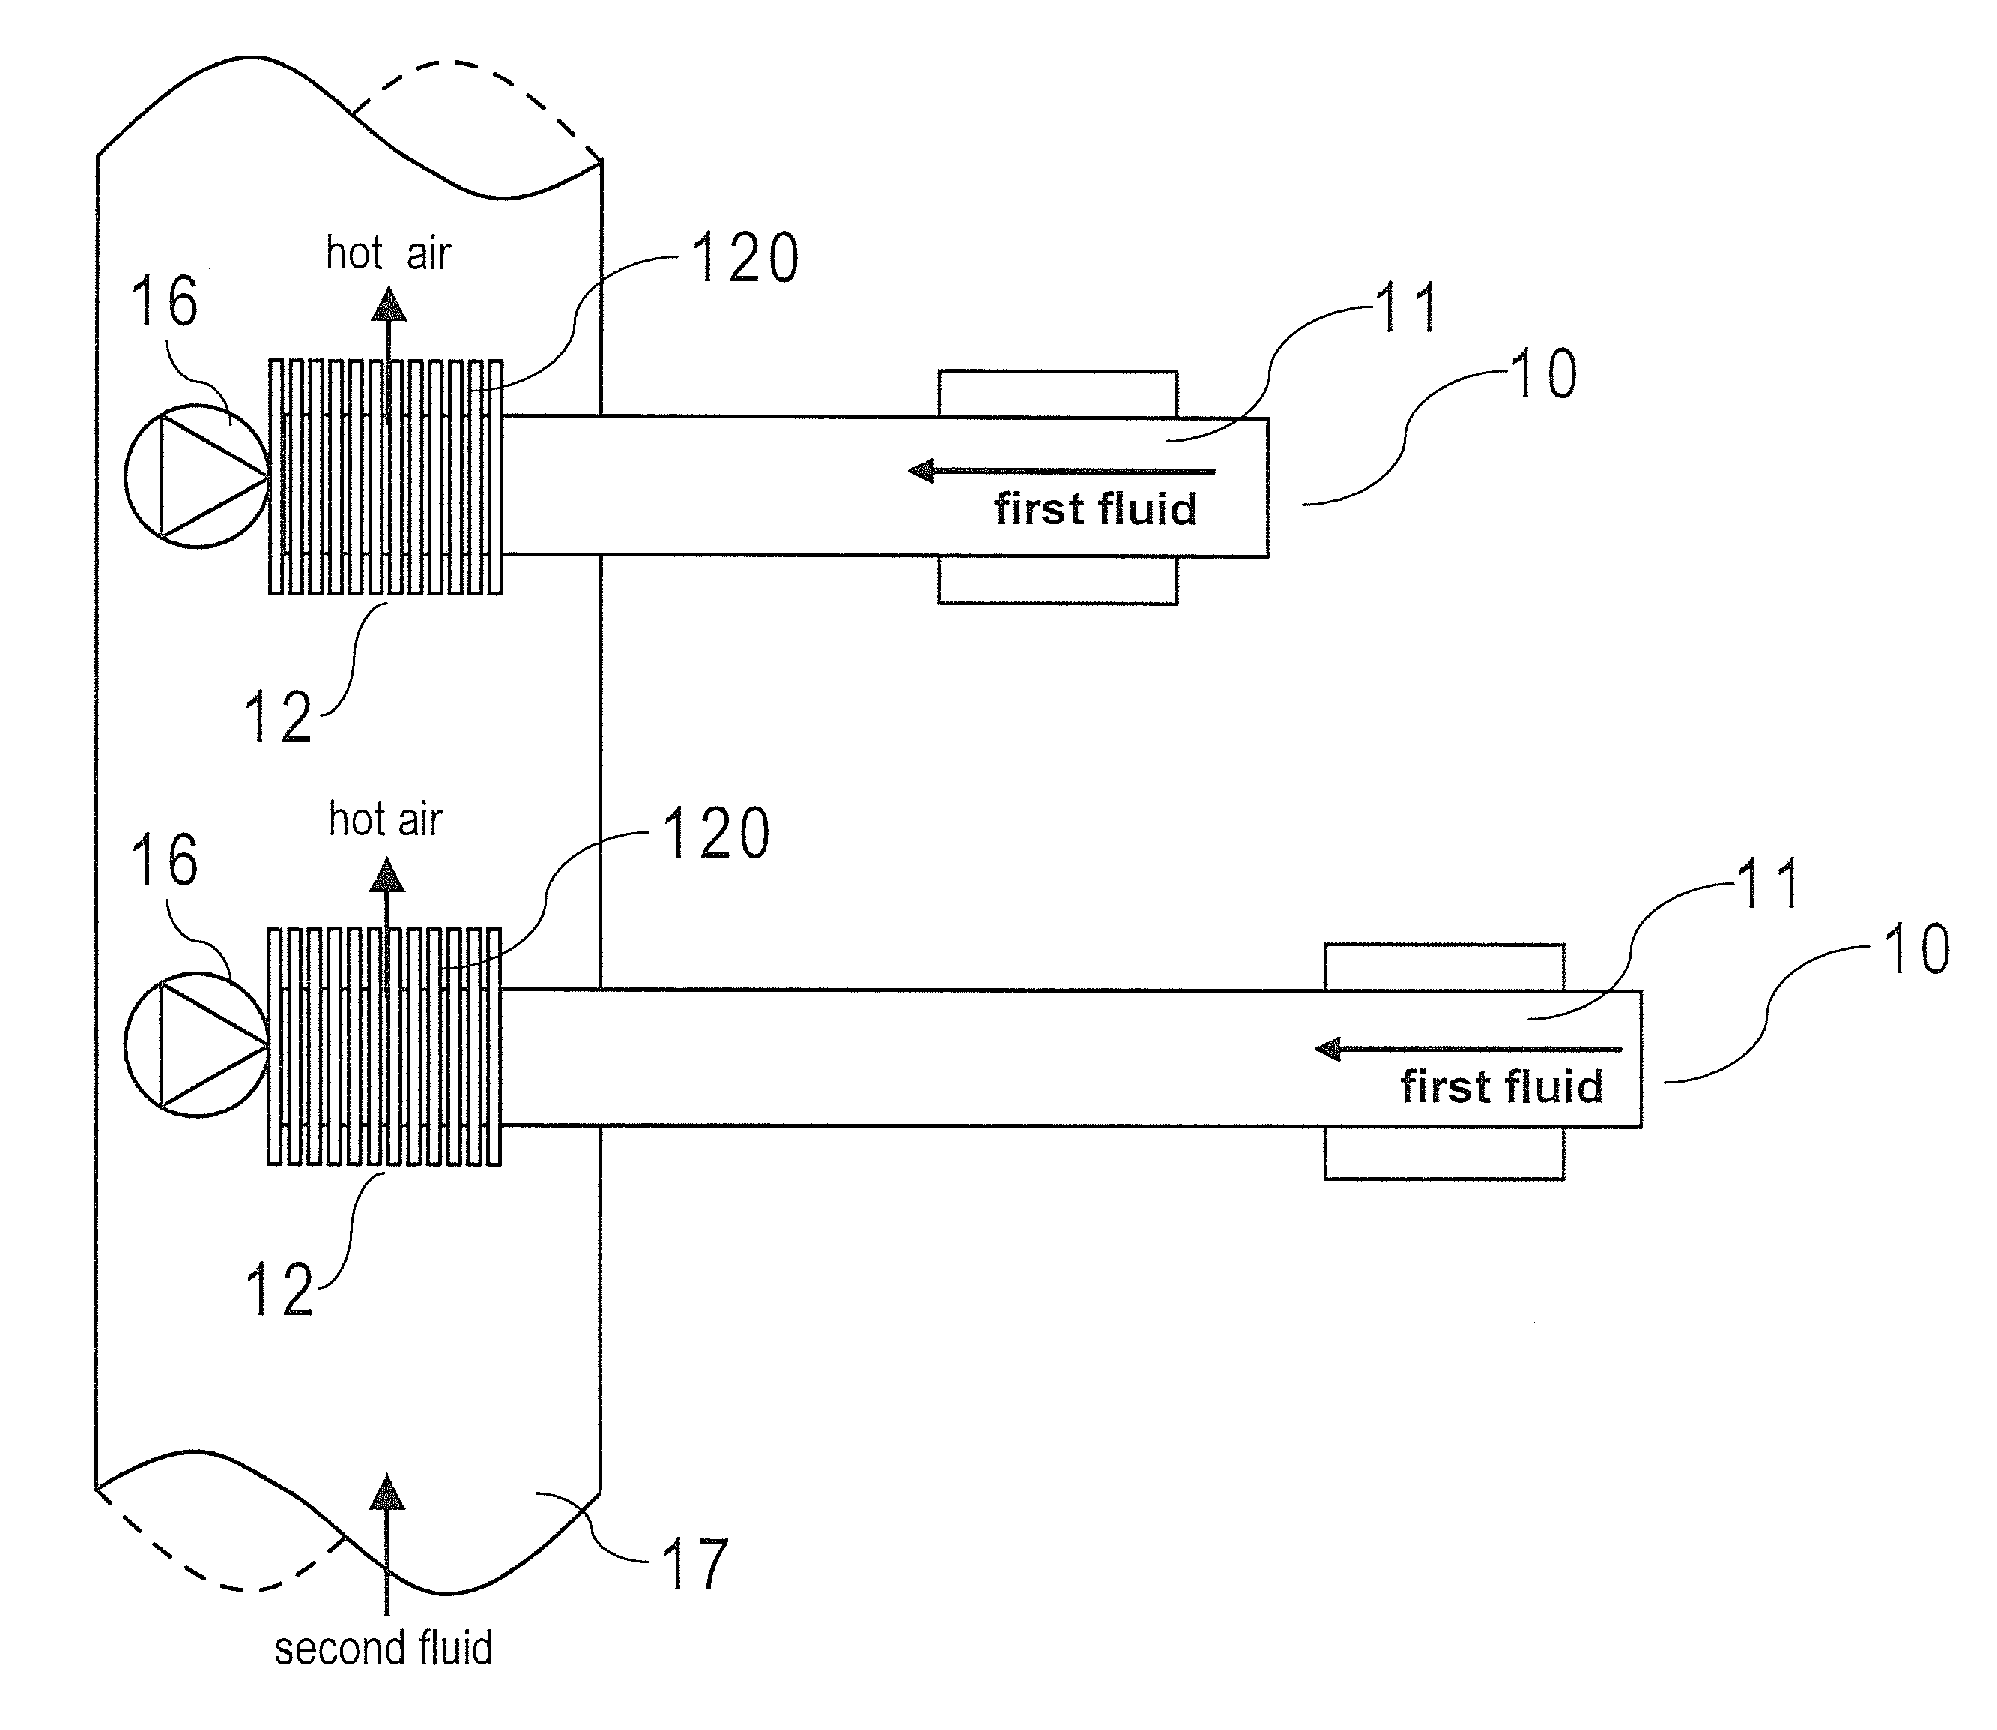 Heat dissipation apparatus for data center